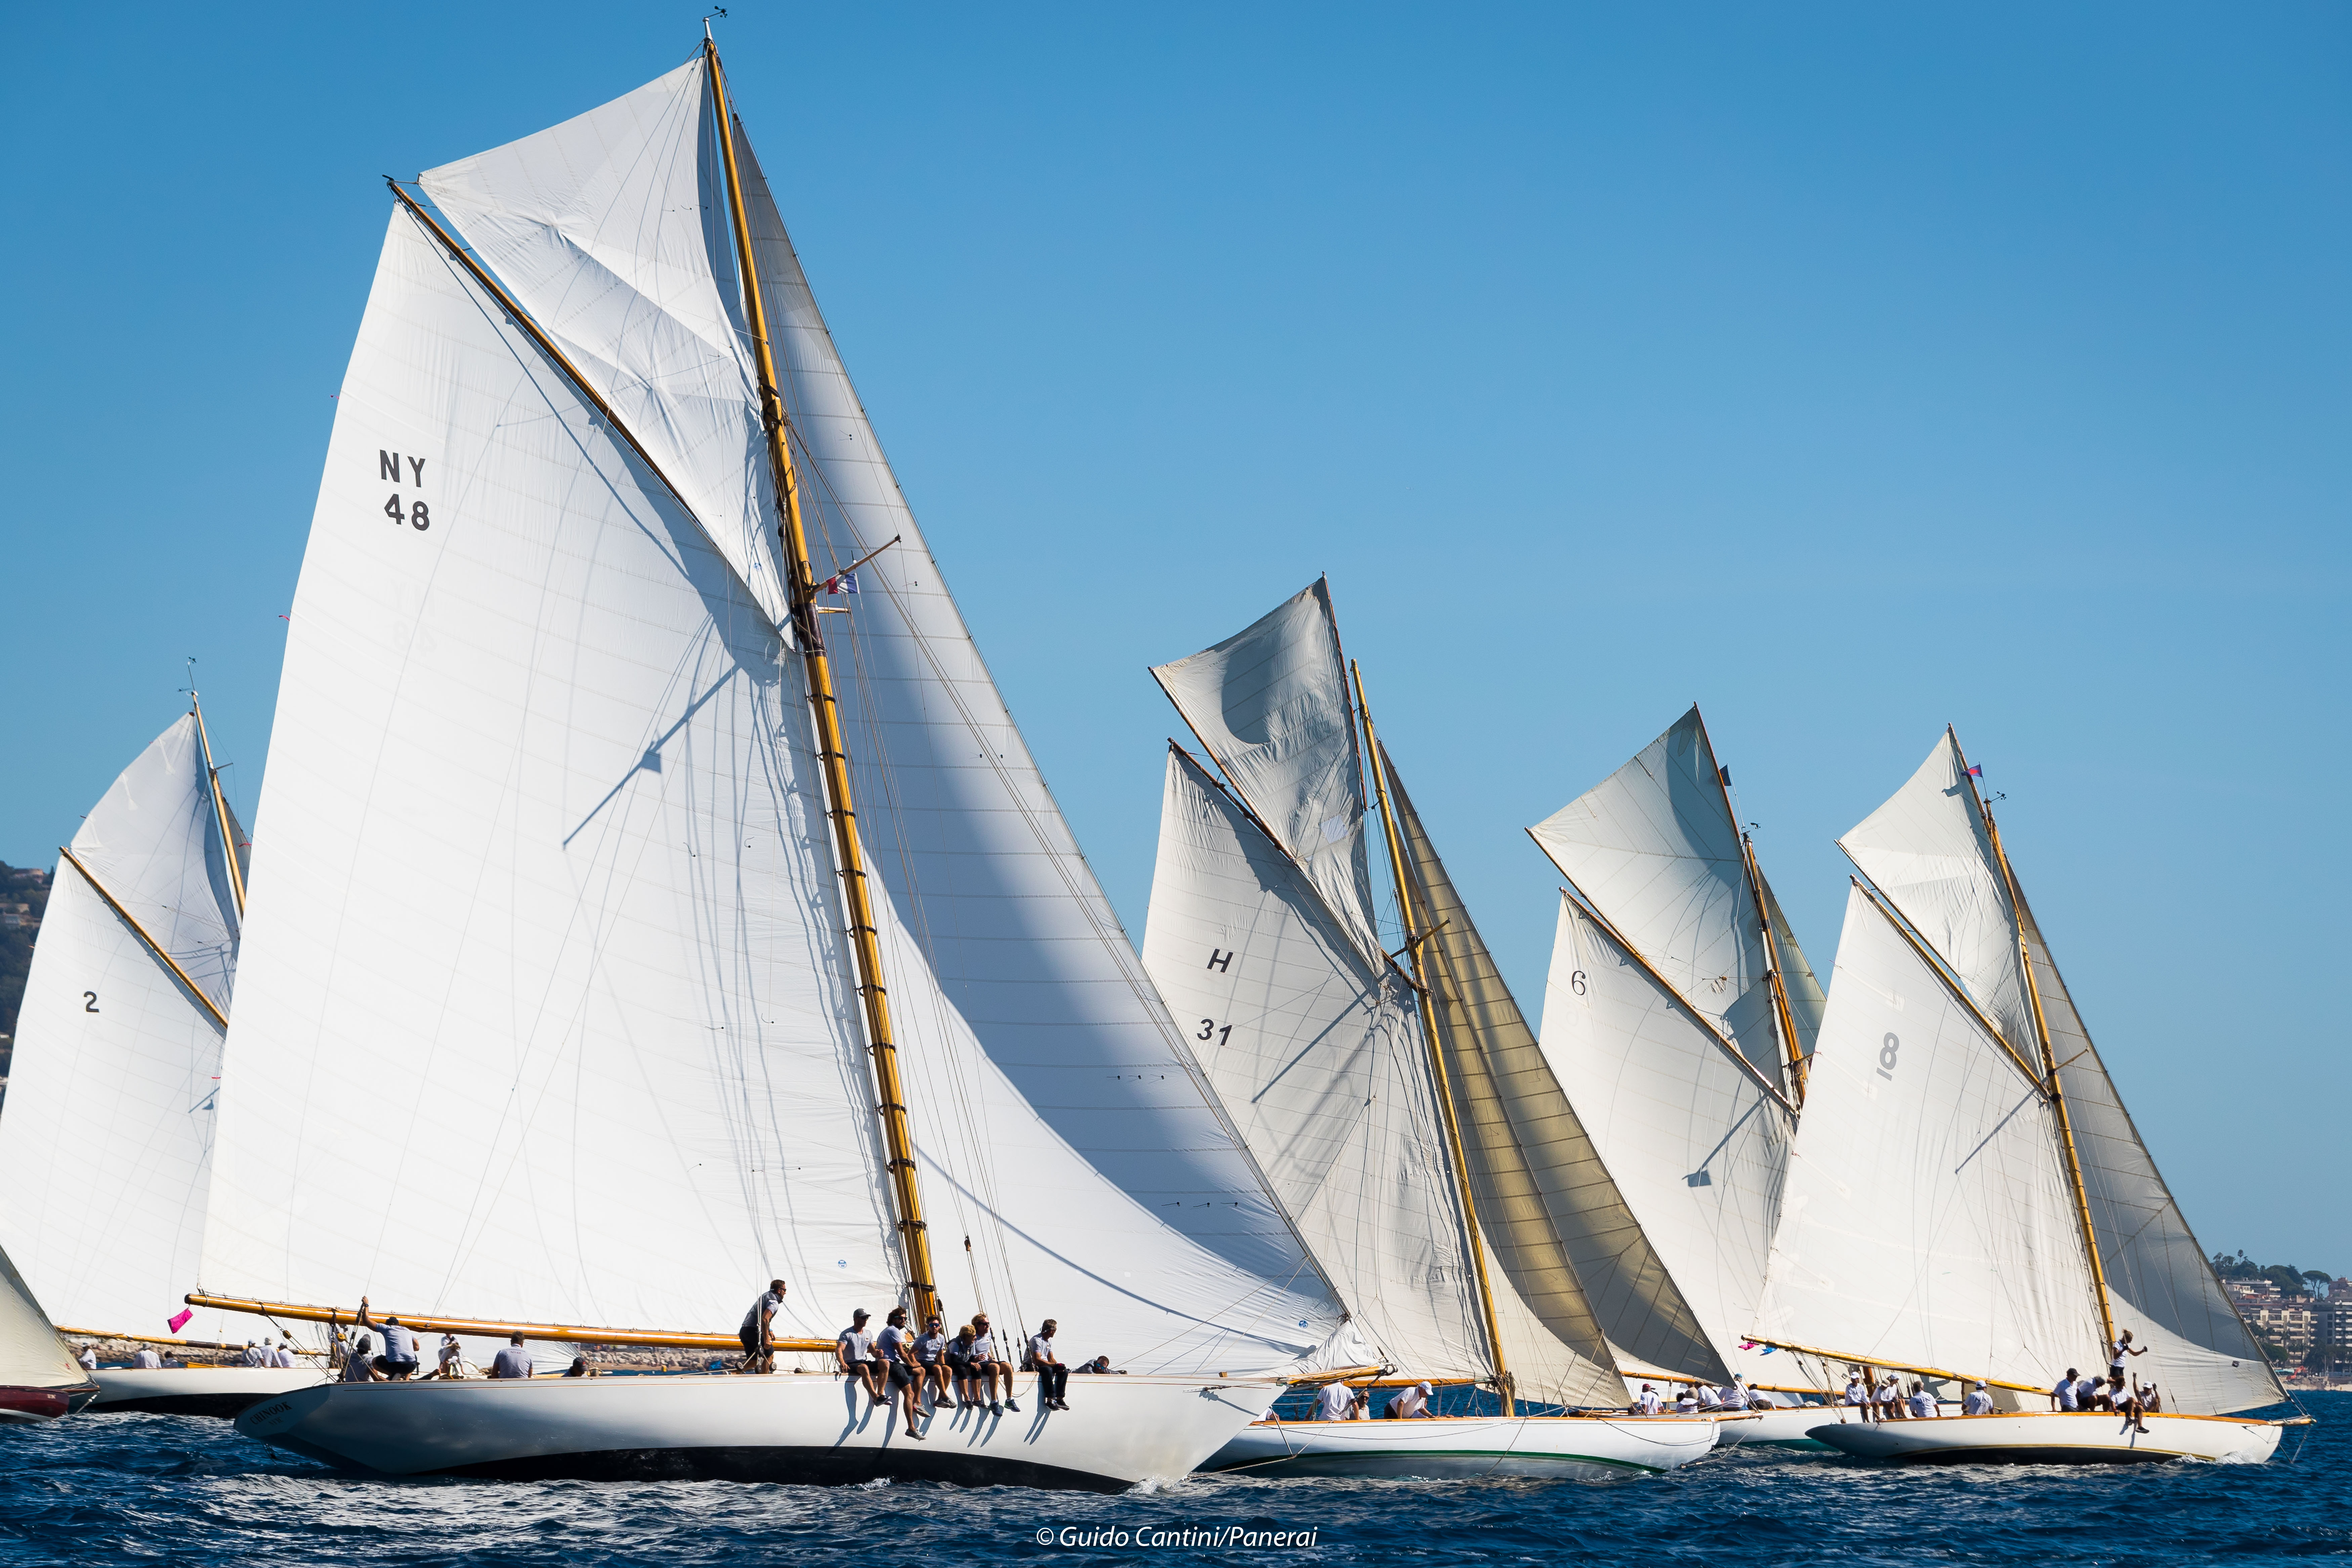  Dragon, Classic Yachts  Regates Royales  Cannes FRA  Final results